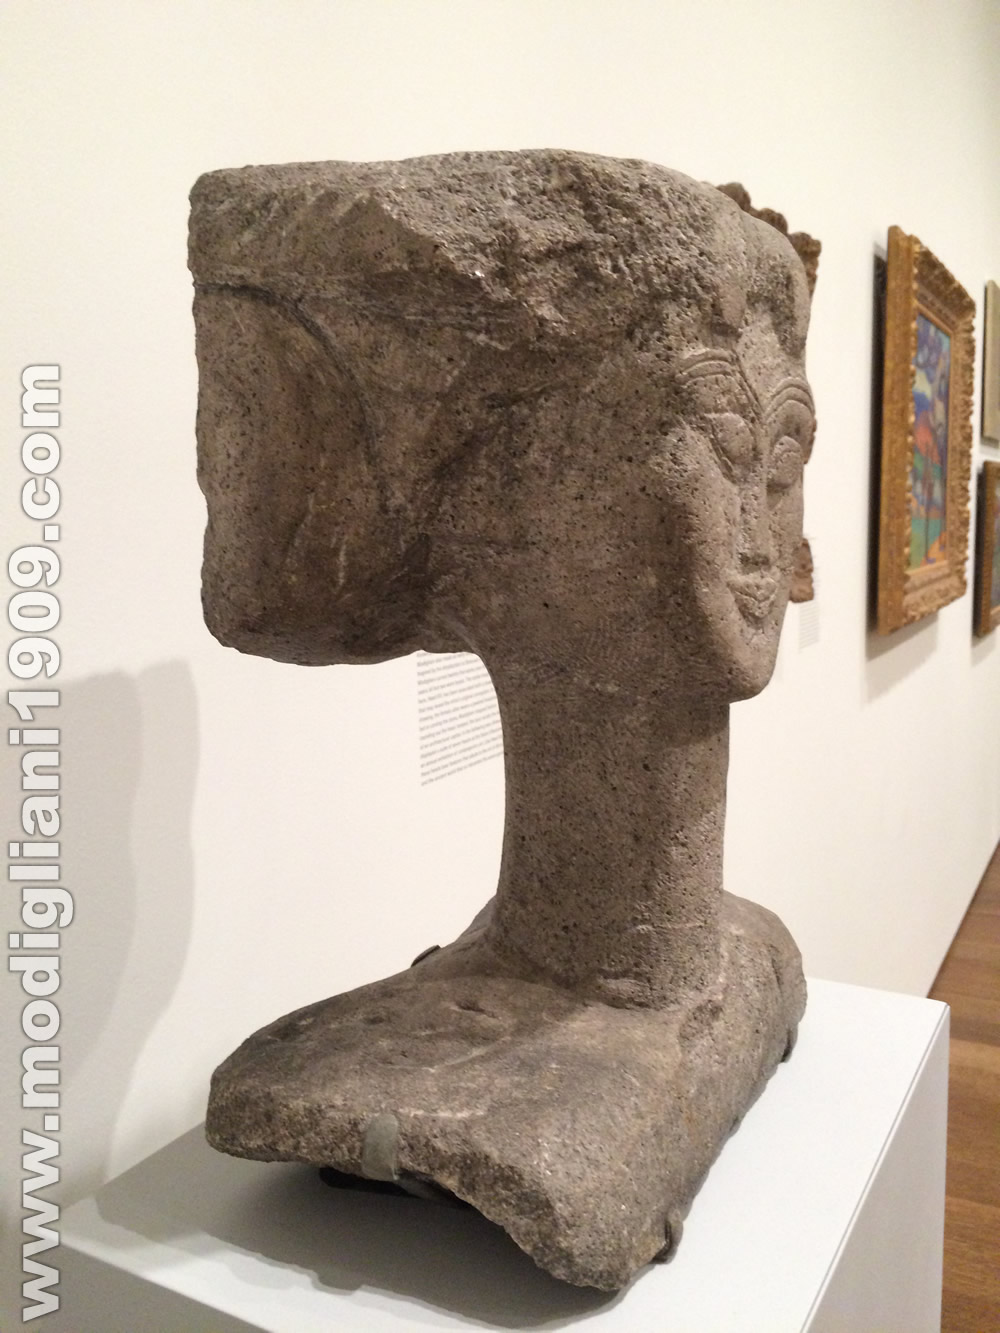 Head of woman (right side), Amedeo Modigliani, 1911, Stone, Harvard Art Museums/Fogg Museum, Gift of Lois Orswell